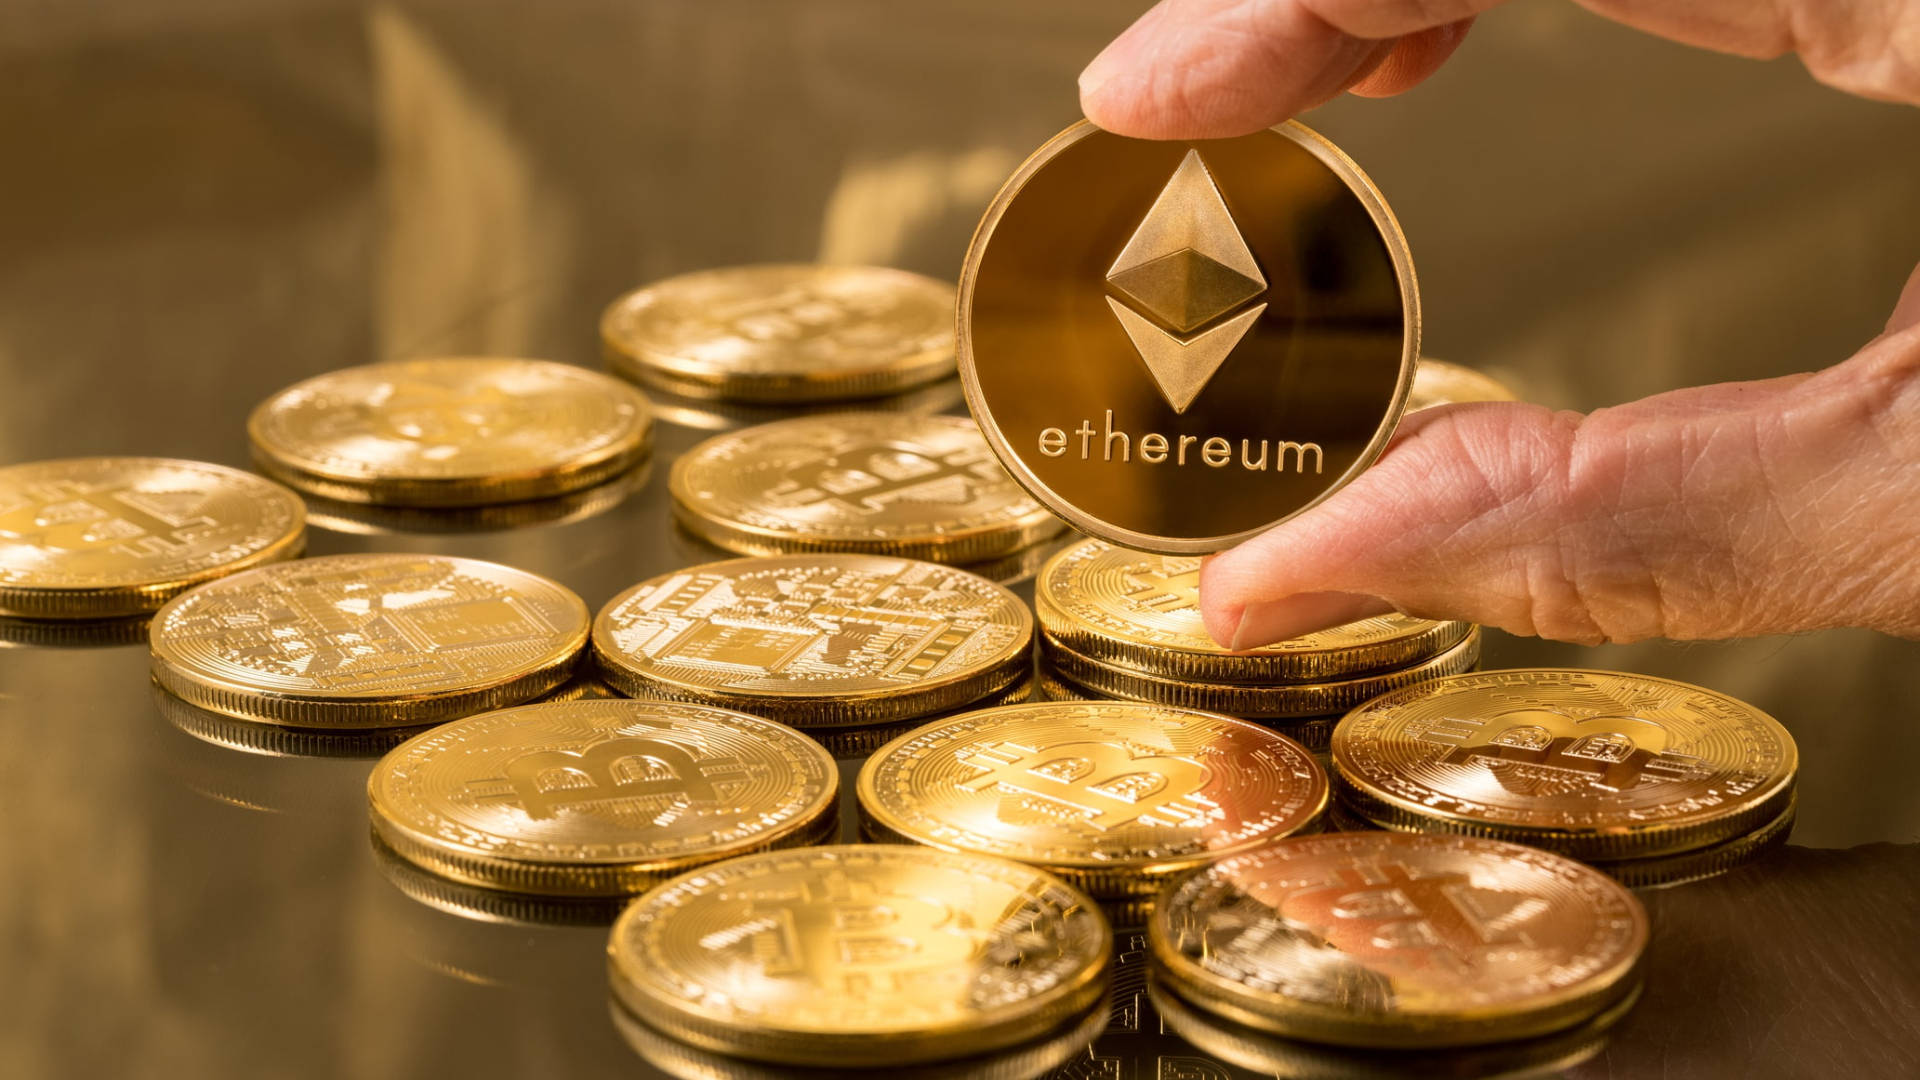 Hand Holding Ethereum  Gold Coin Wallpaper